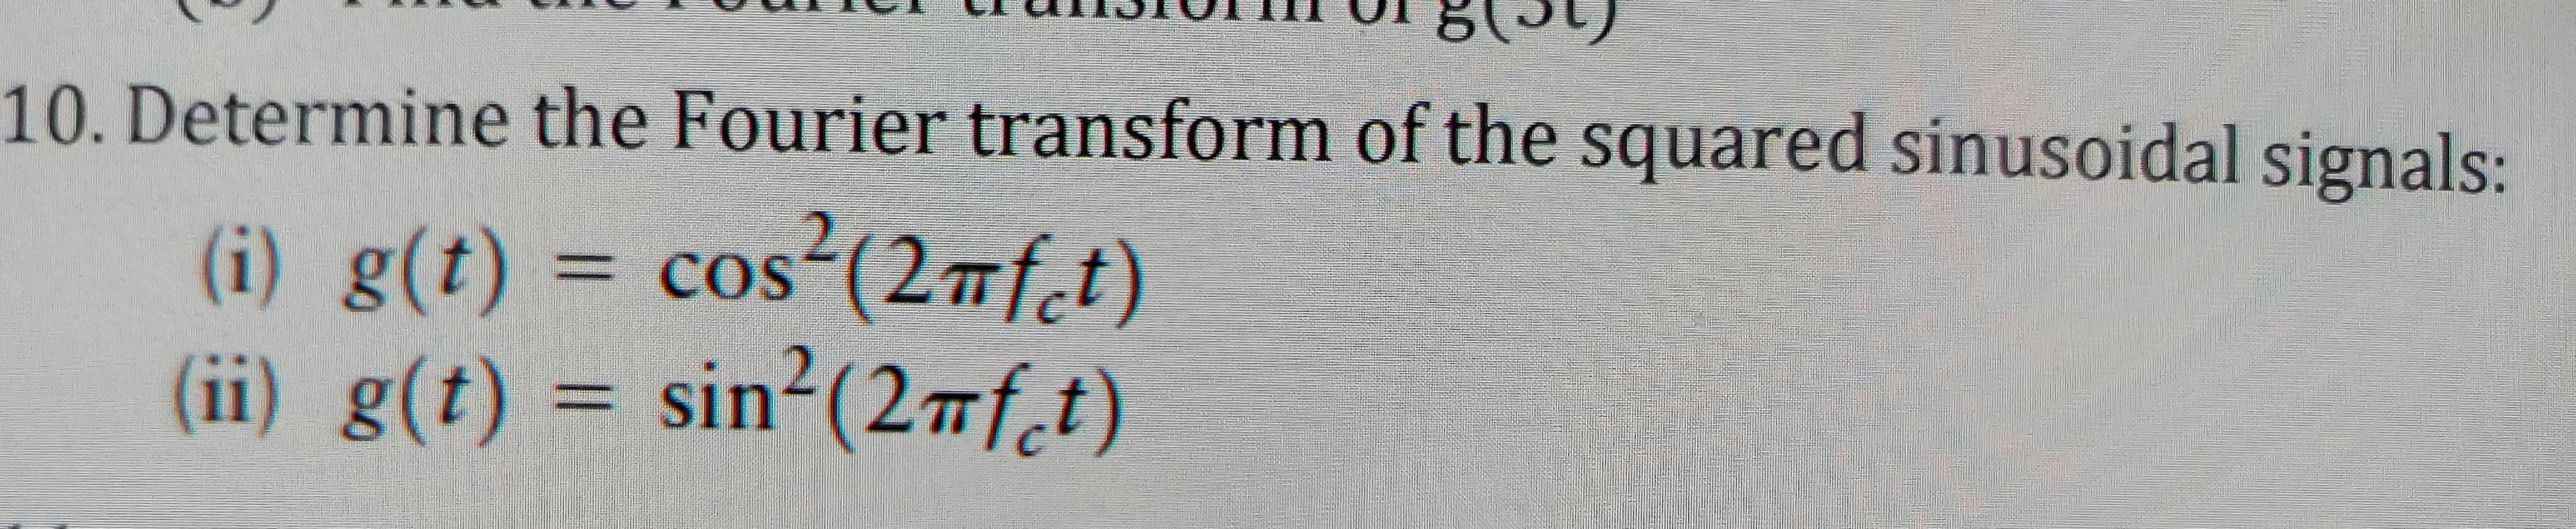 10.Determine the Fourier transform of the
squared sinusoidal signals:
SI
(i) g(t) = cos(2nfct)
(ii) g(t) = sin²(2¬f_t)
cos-(2mf,t
COS
